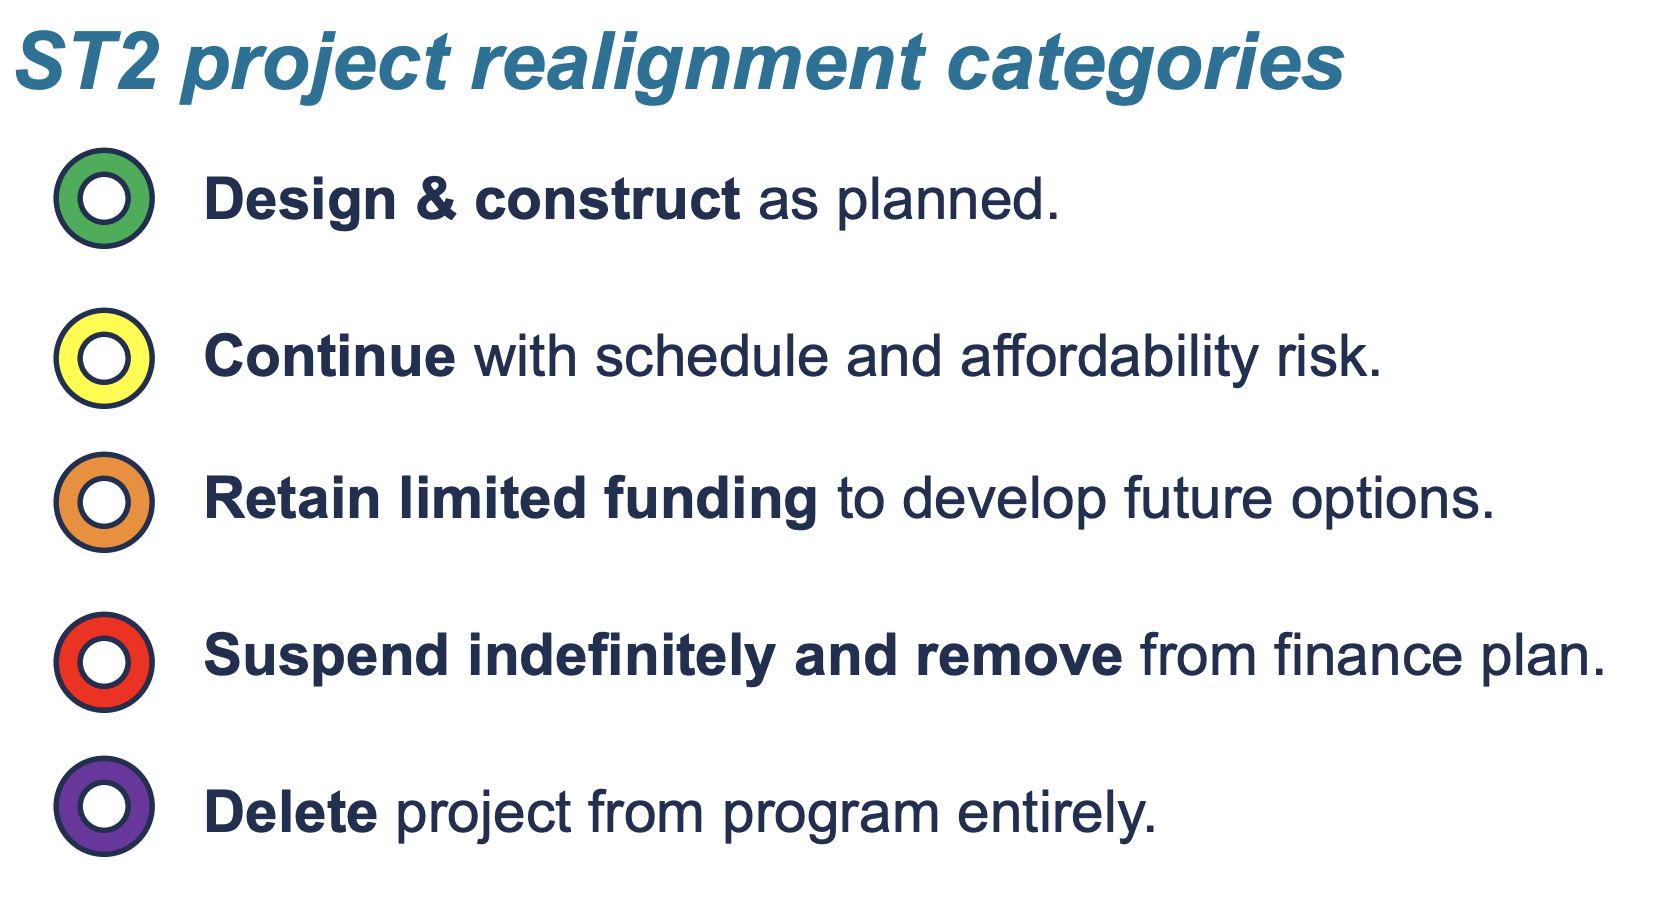 Realignment symbols for ST2 projects. (Sound Transit)